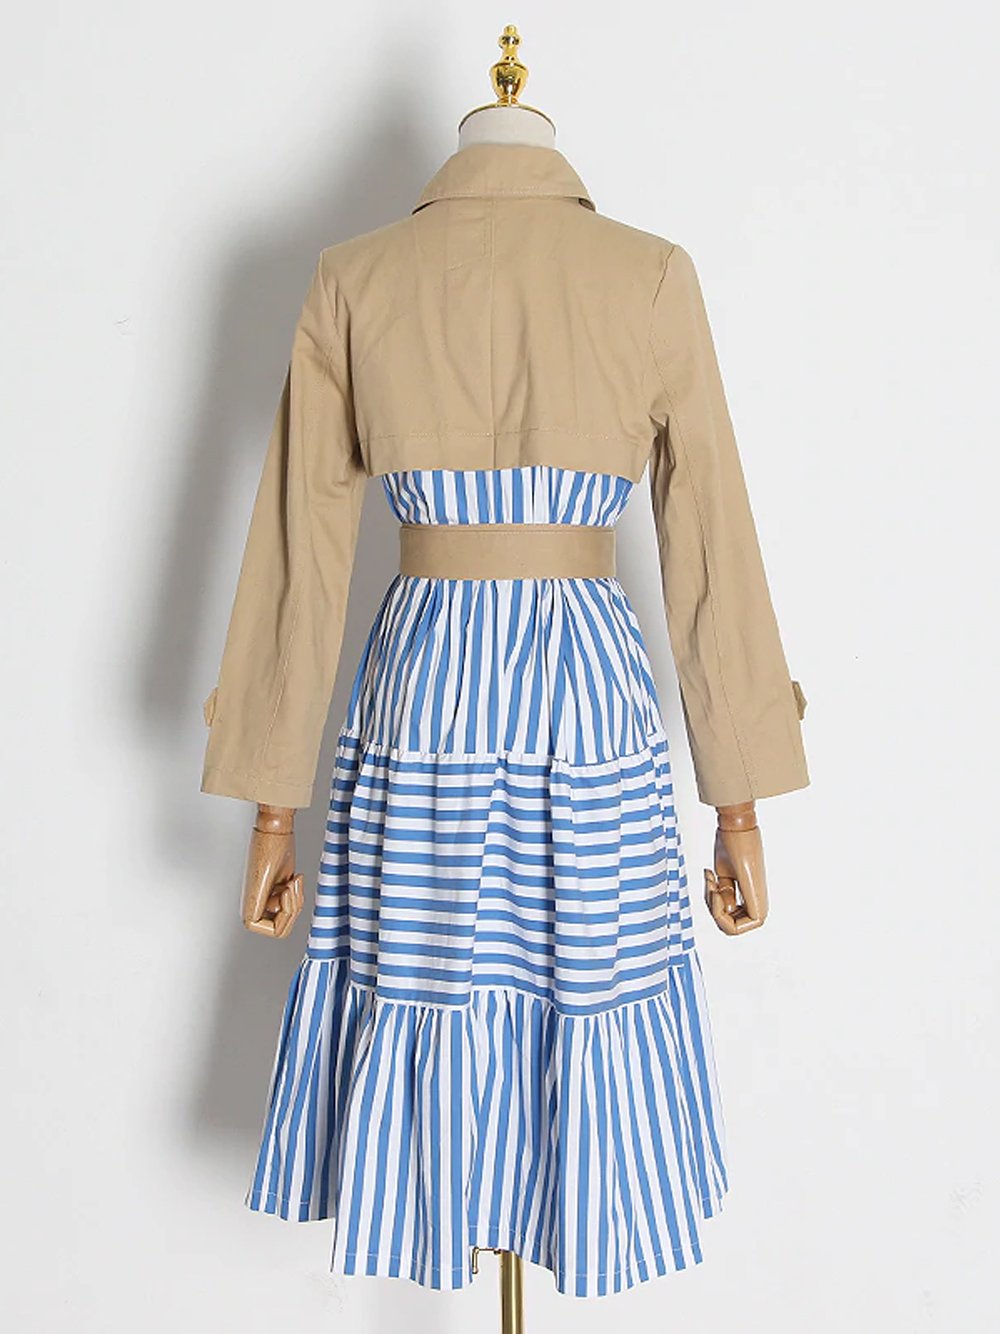 Patchwork Striped Trench Coat